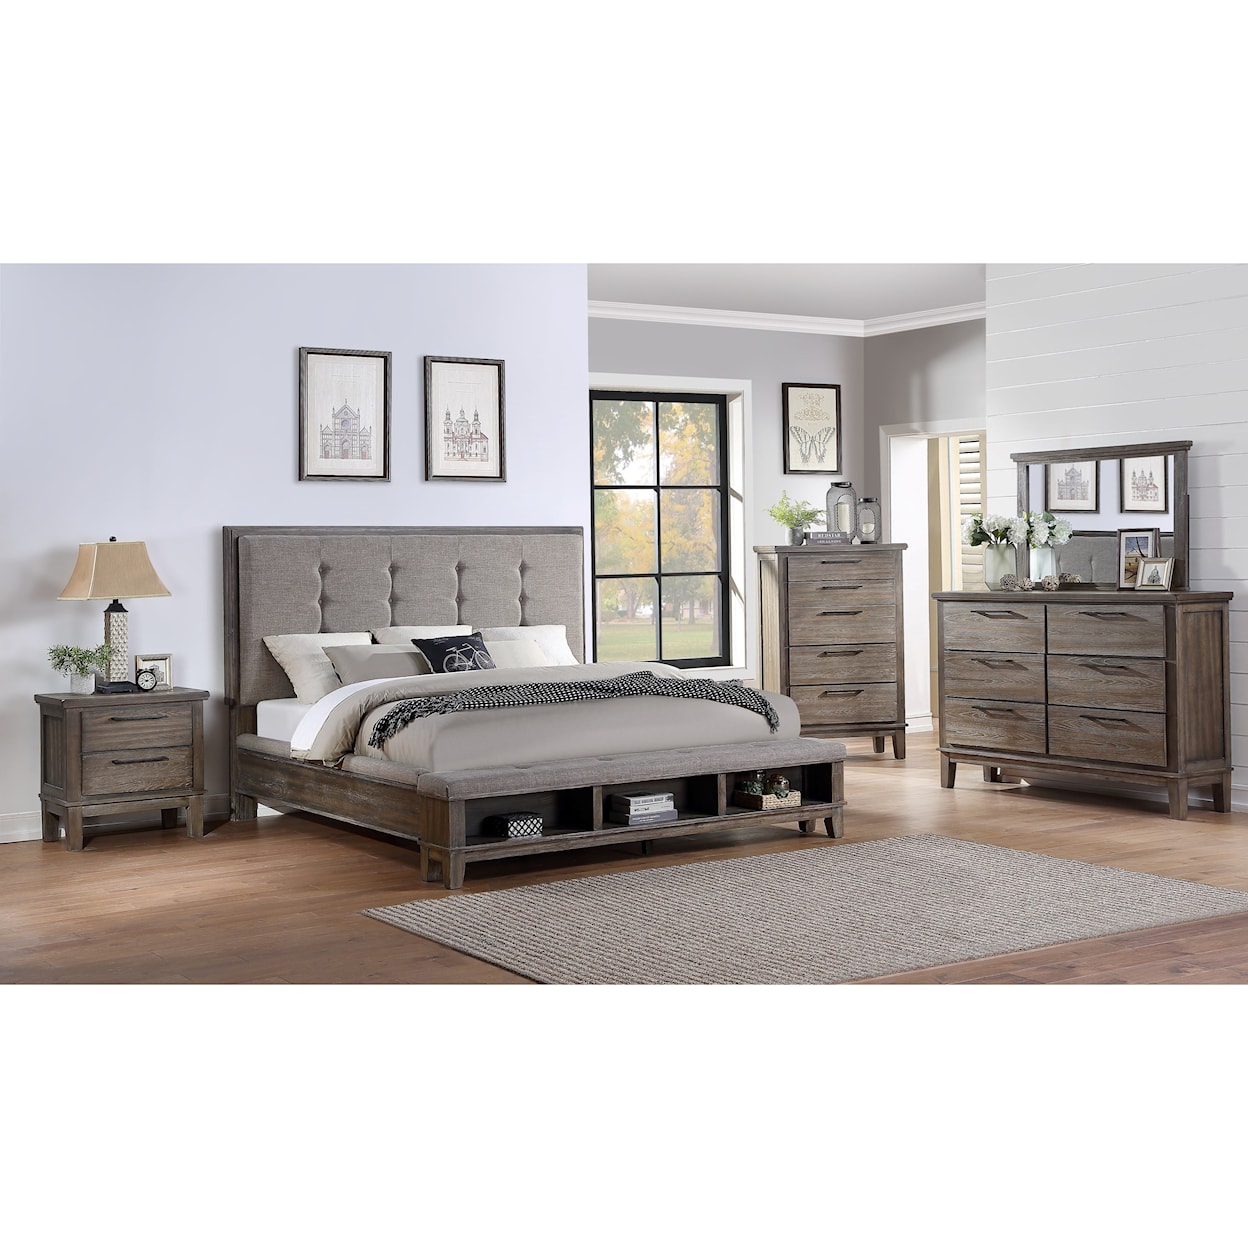 New Classic Cagney Queen Bedroom Group